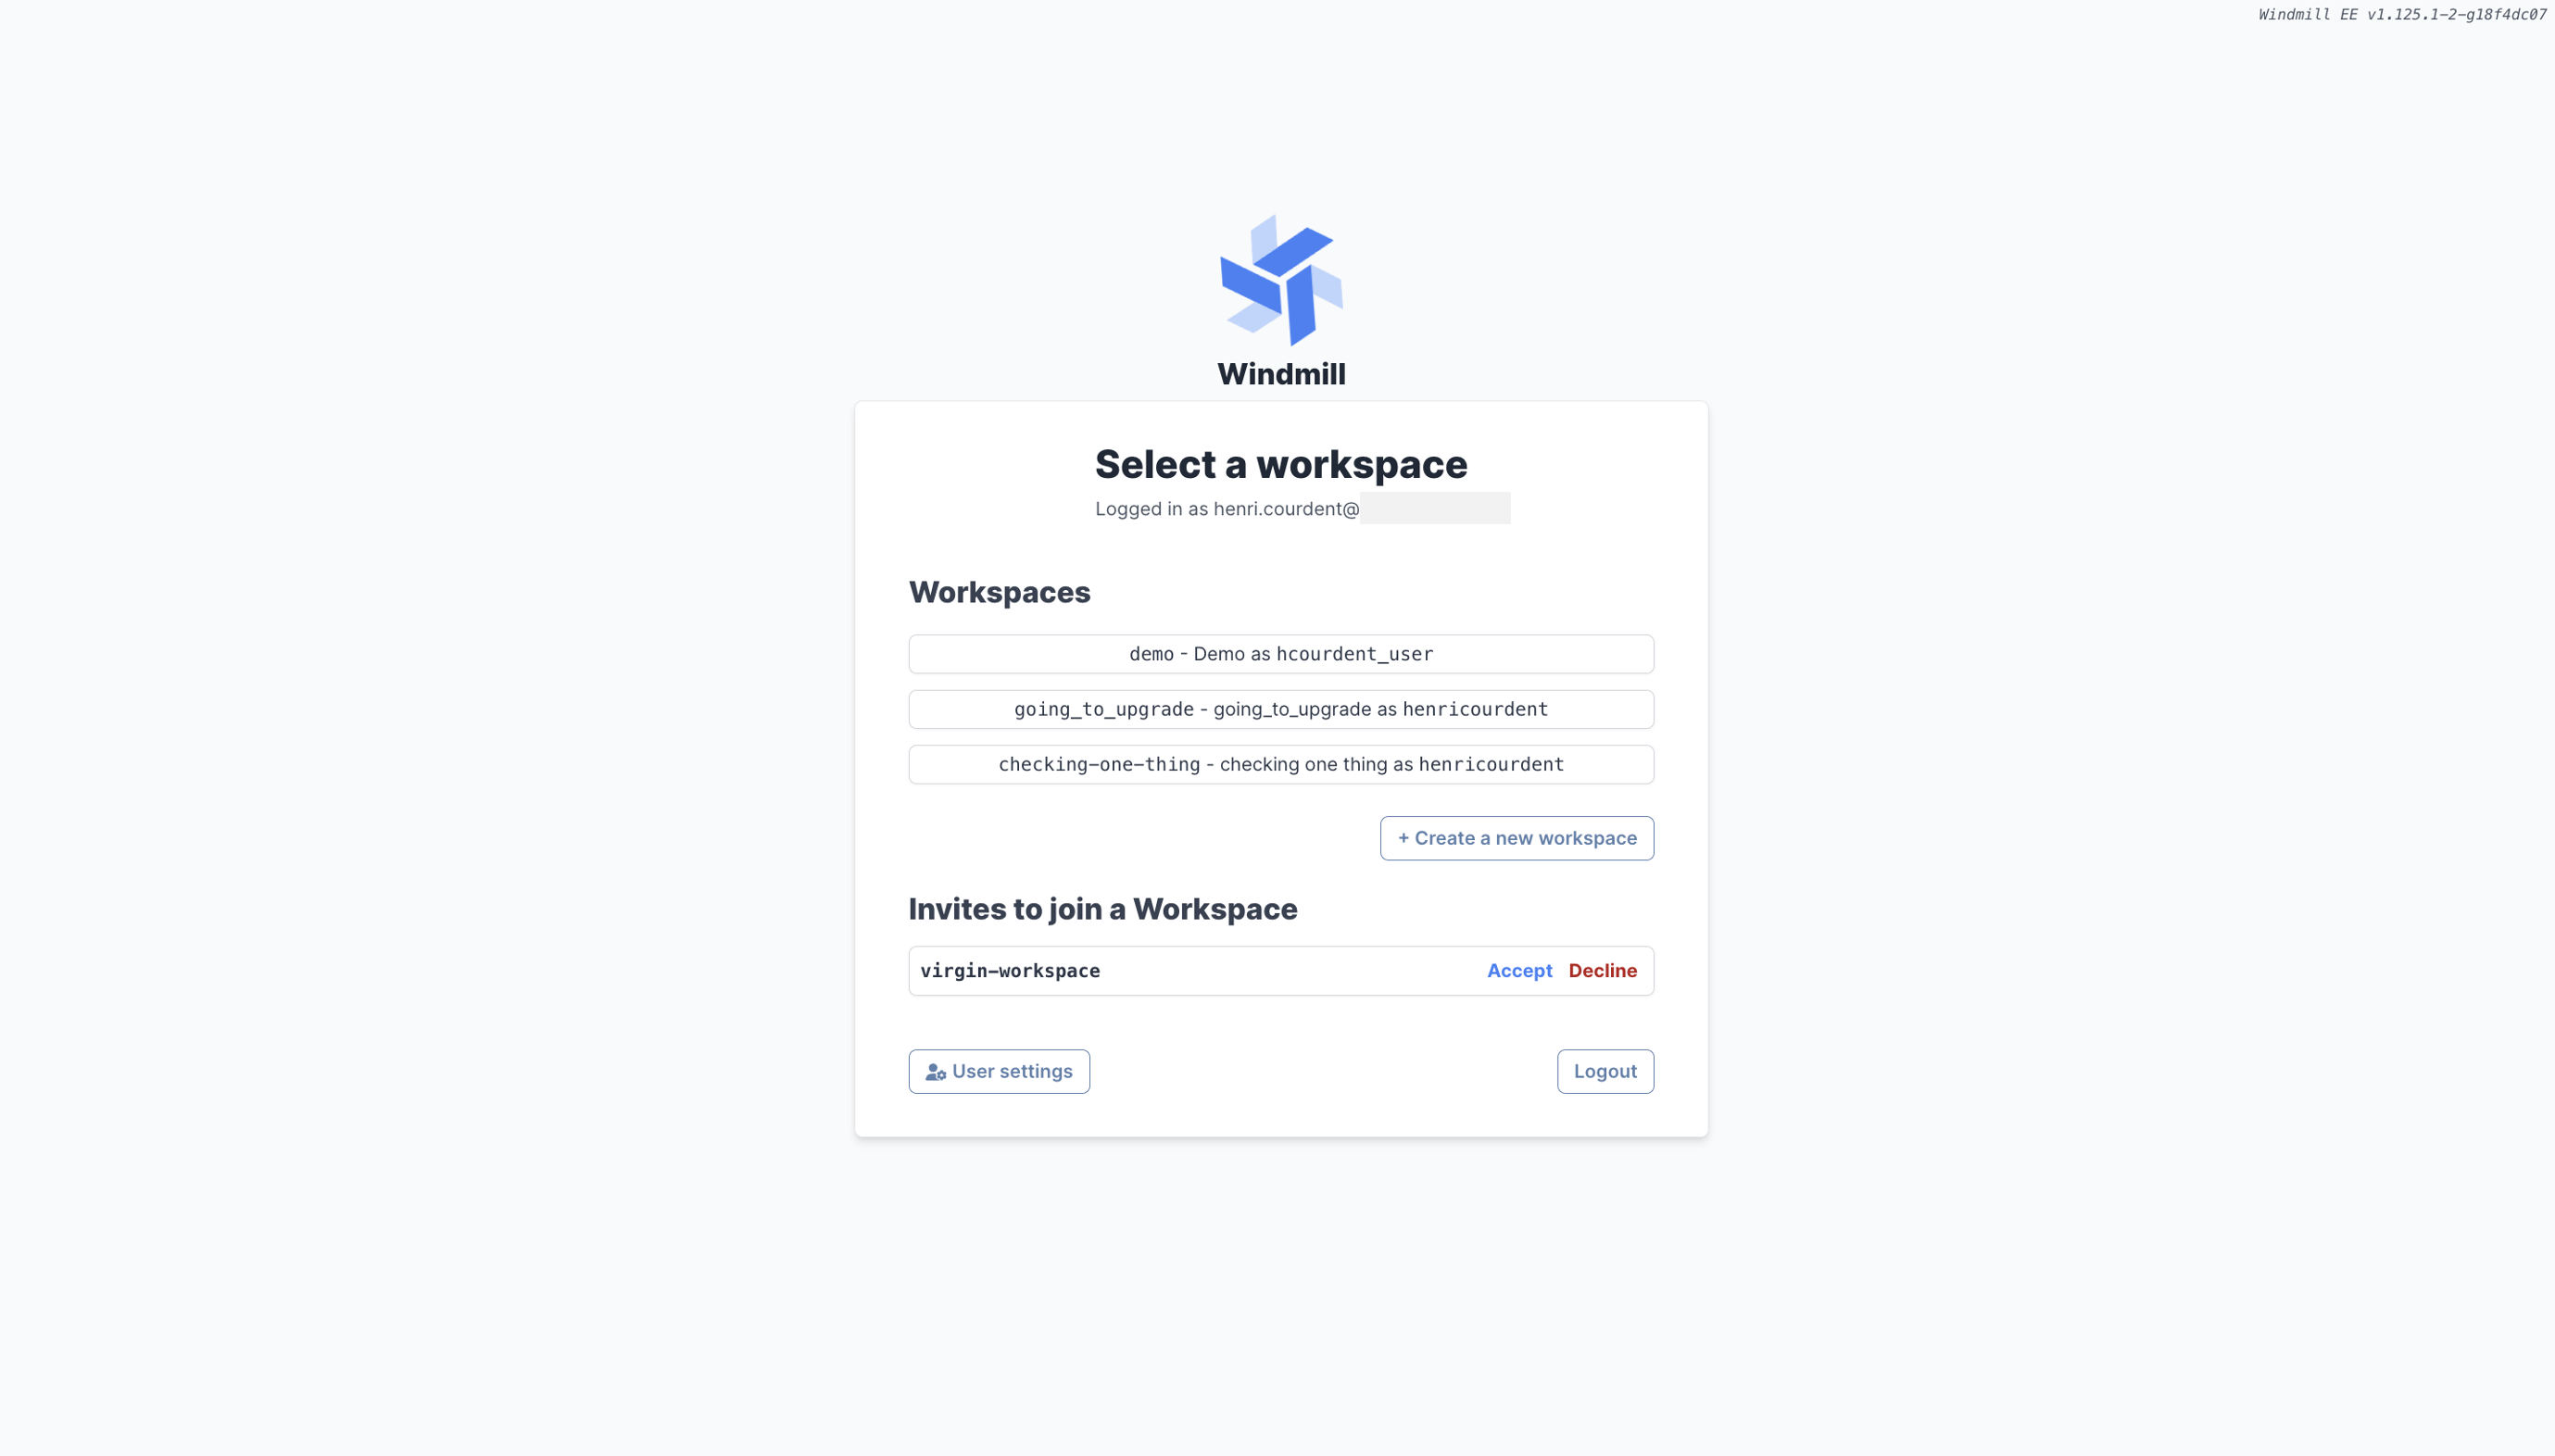 Select an invited workspace